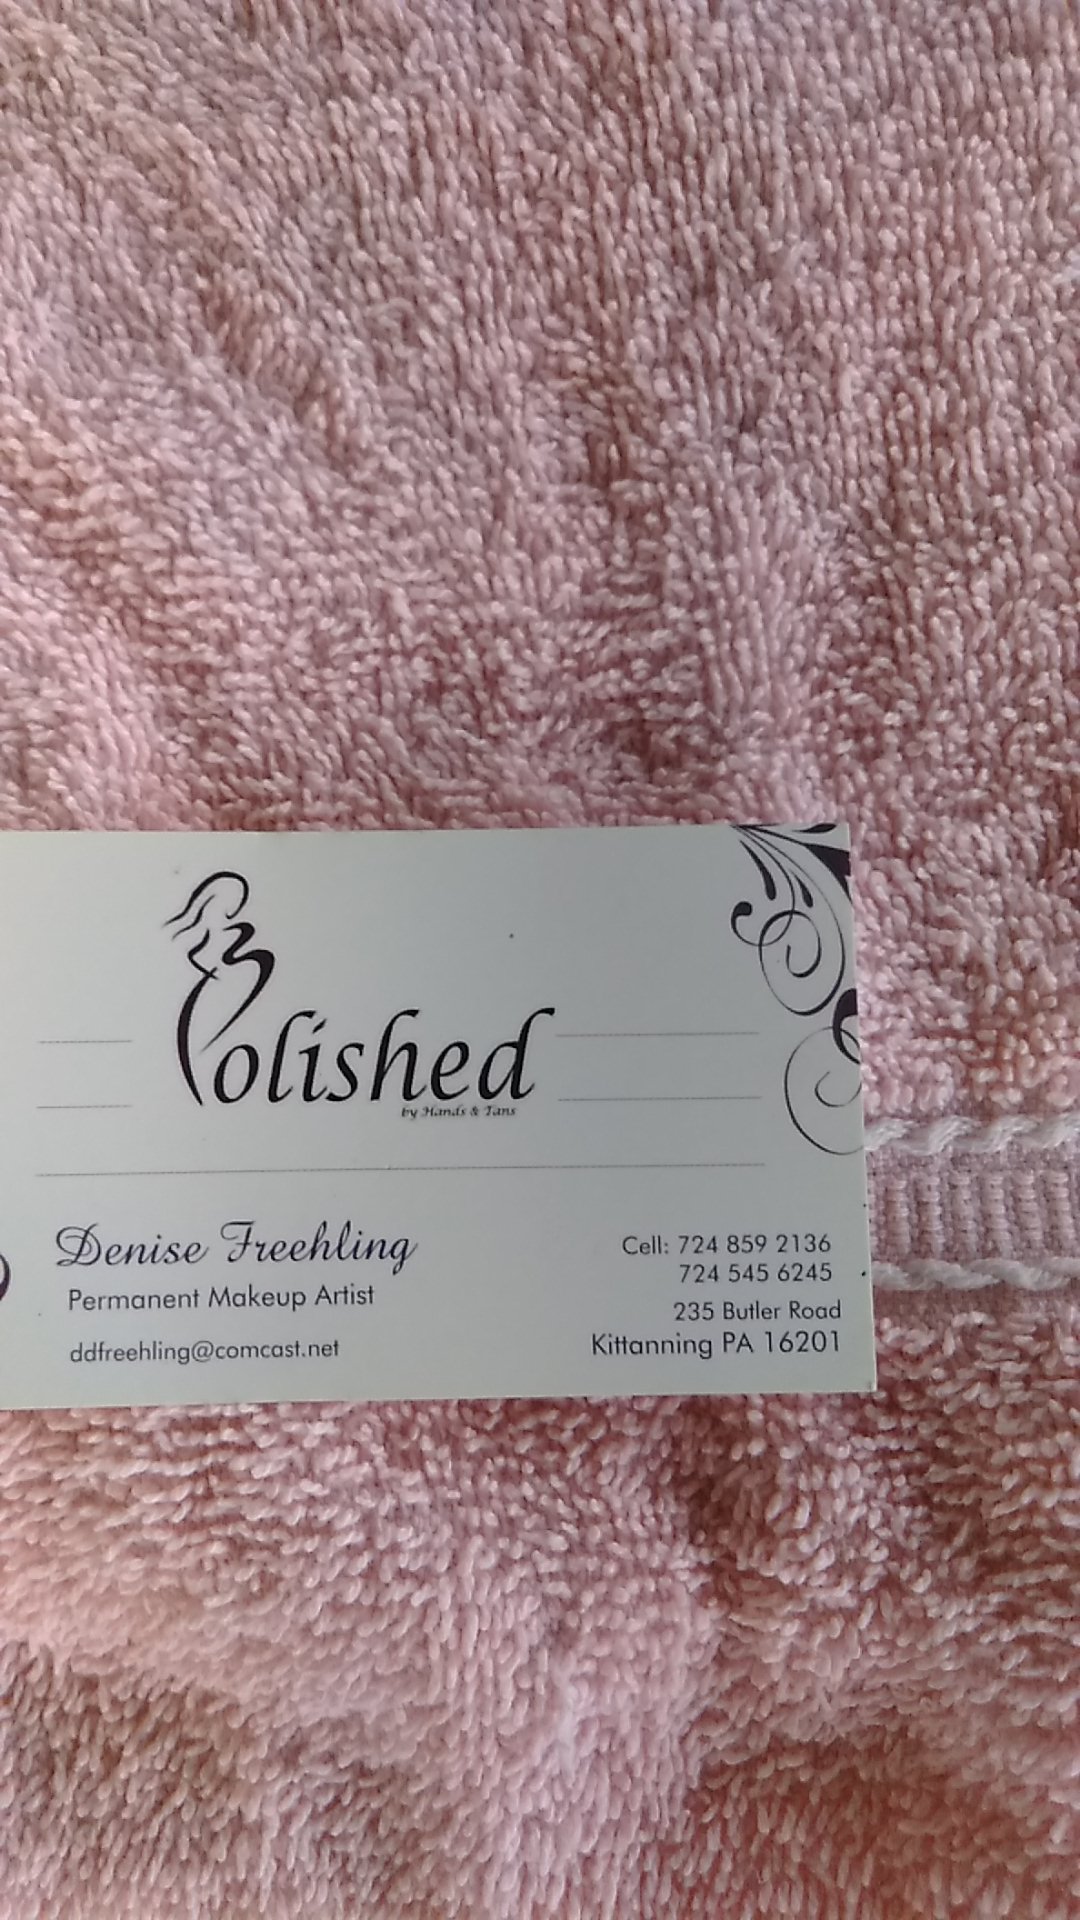 Polished by Hands & Tans 235 Butler Rd, Kittanning Pennsylvania 16201